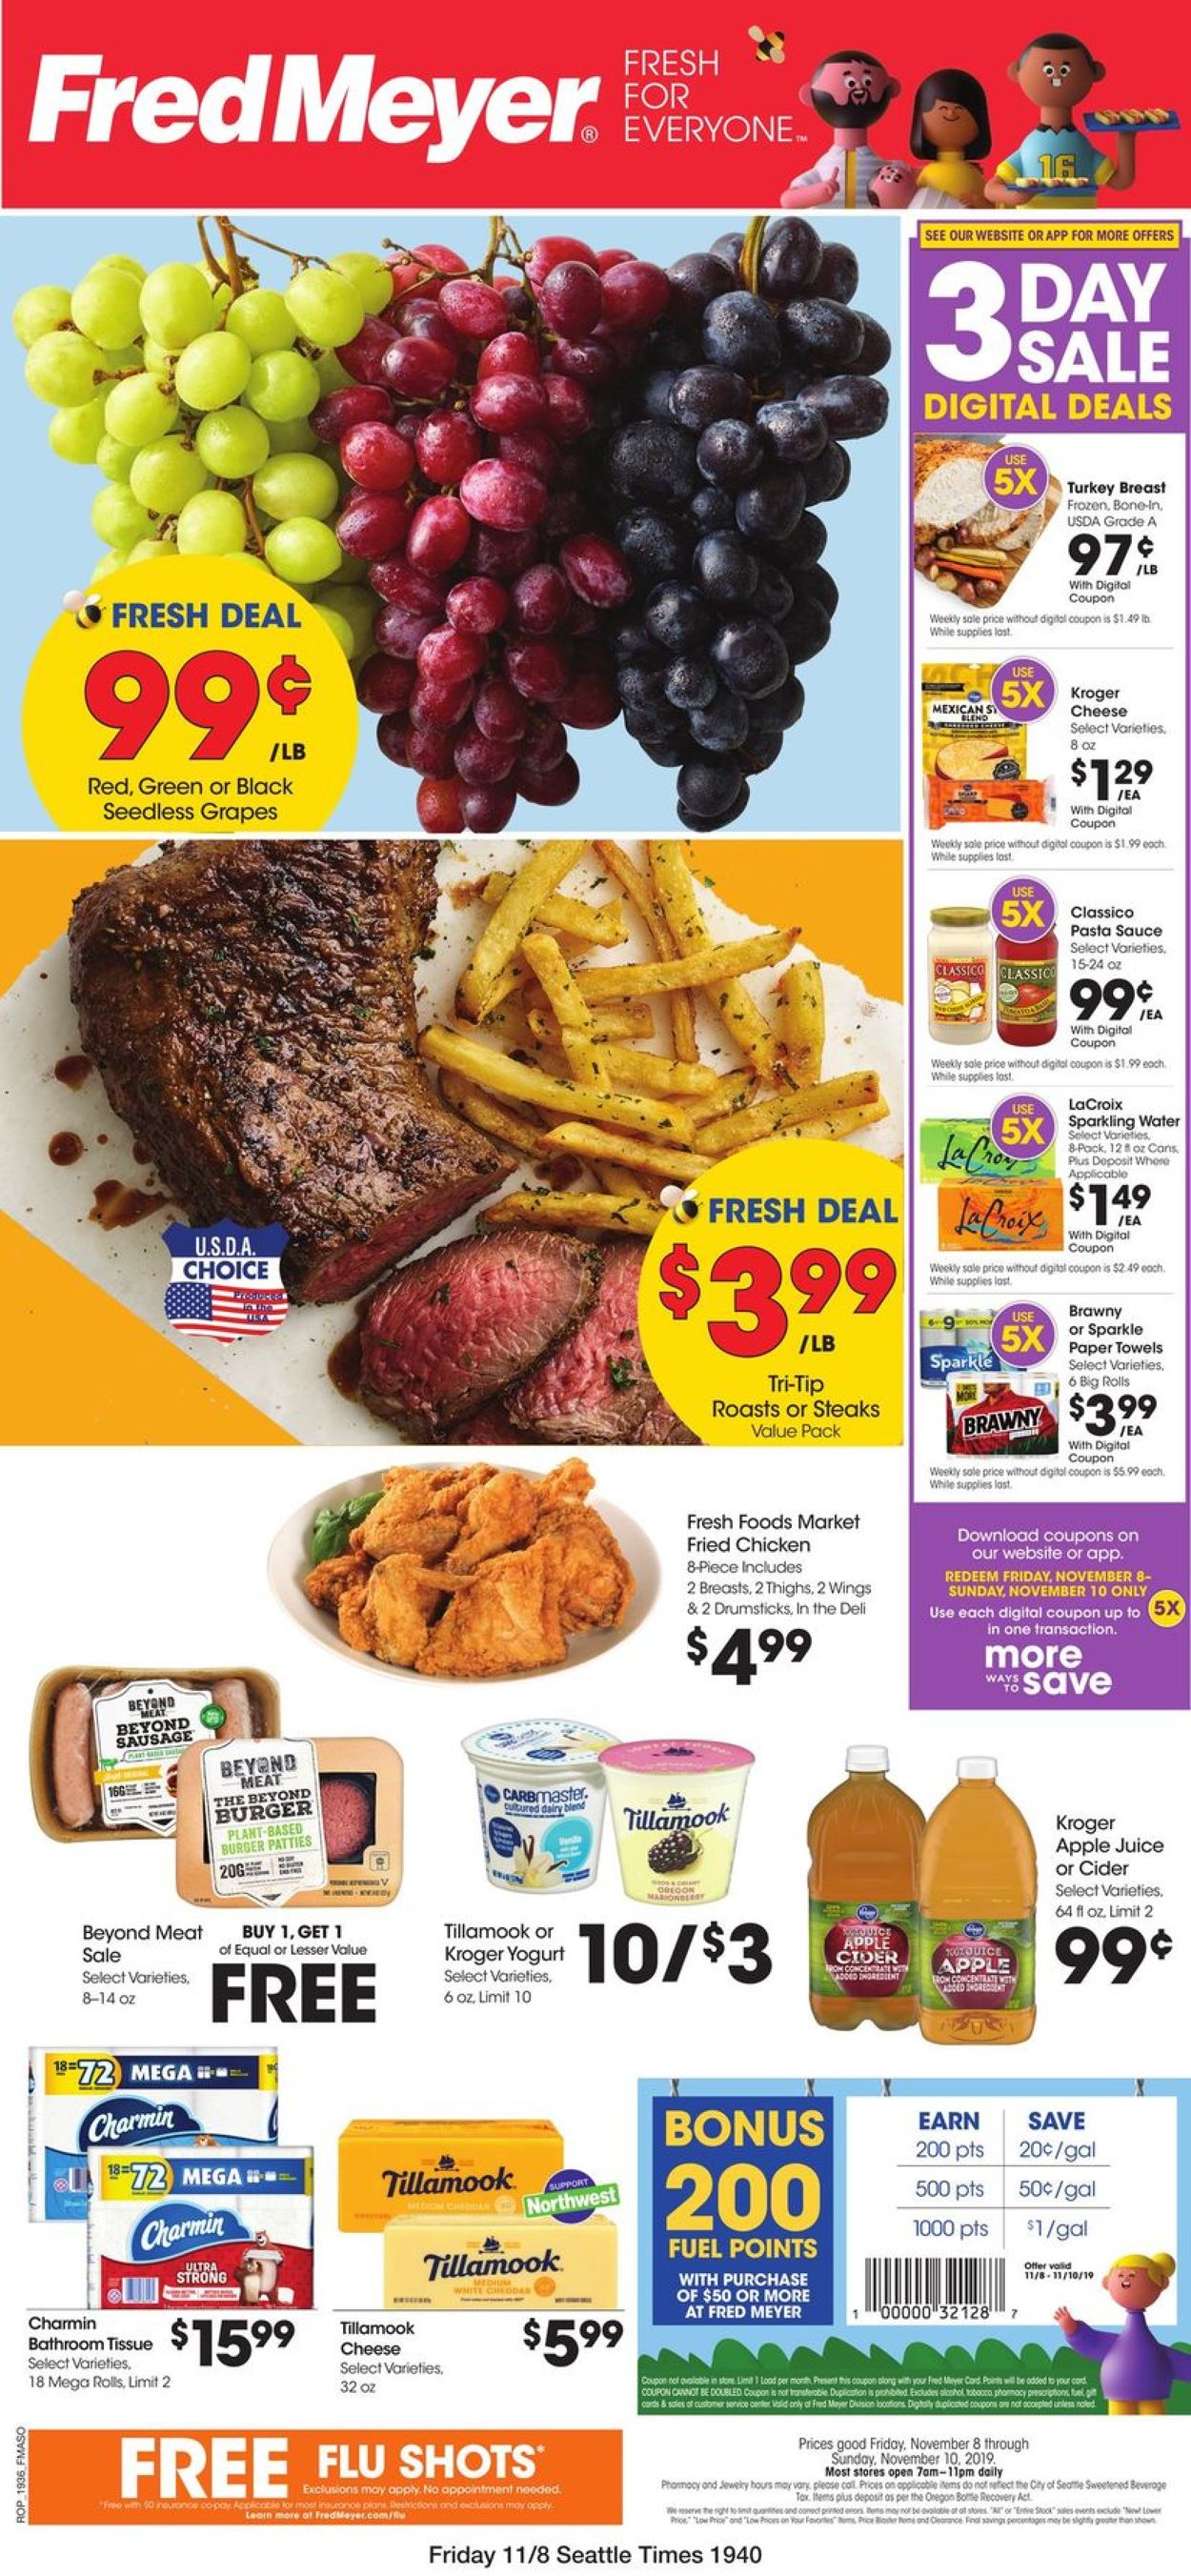 Fred Meyer Current weekly ad 11/08 11/10/2019